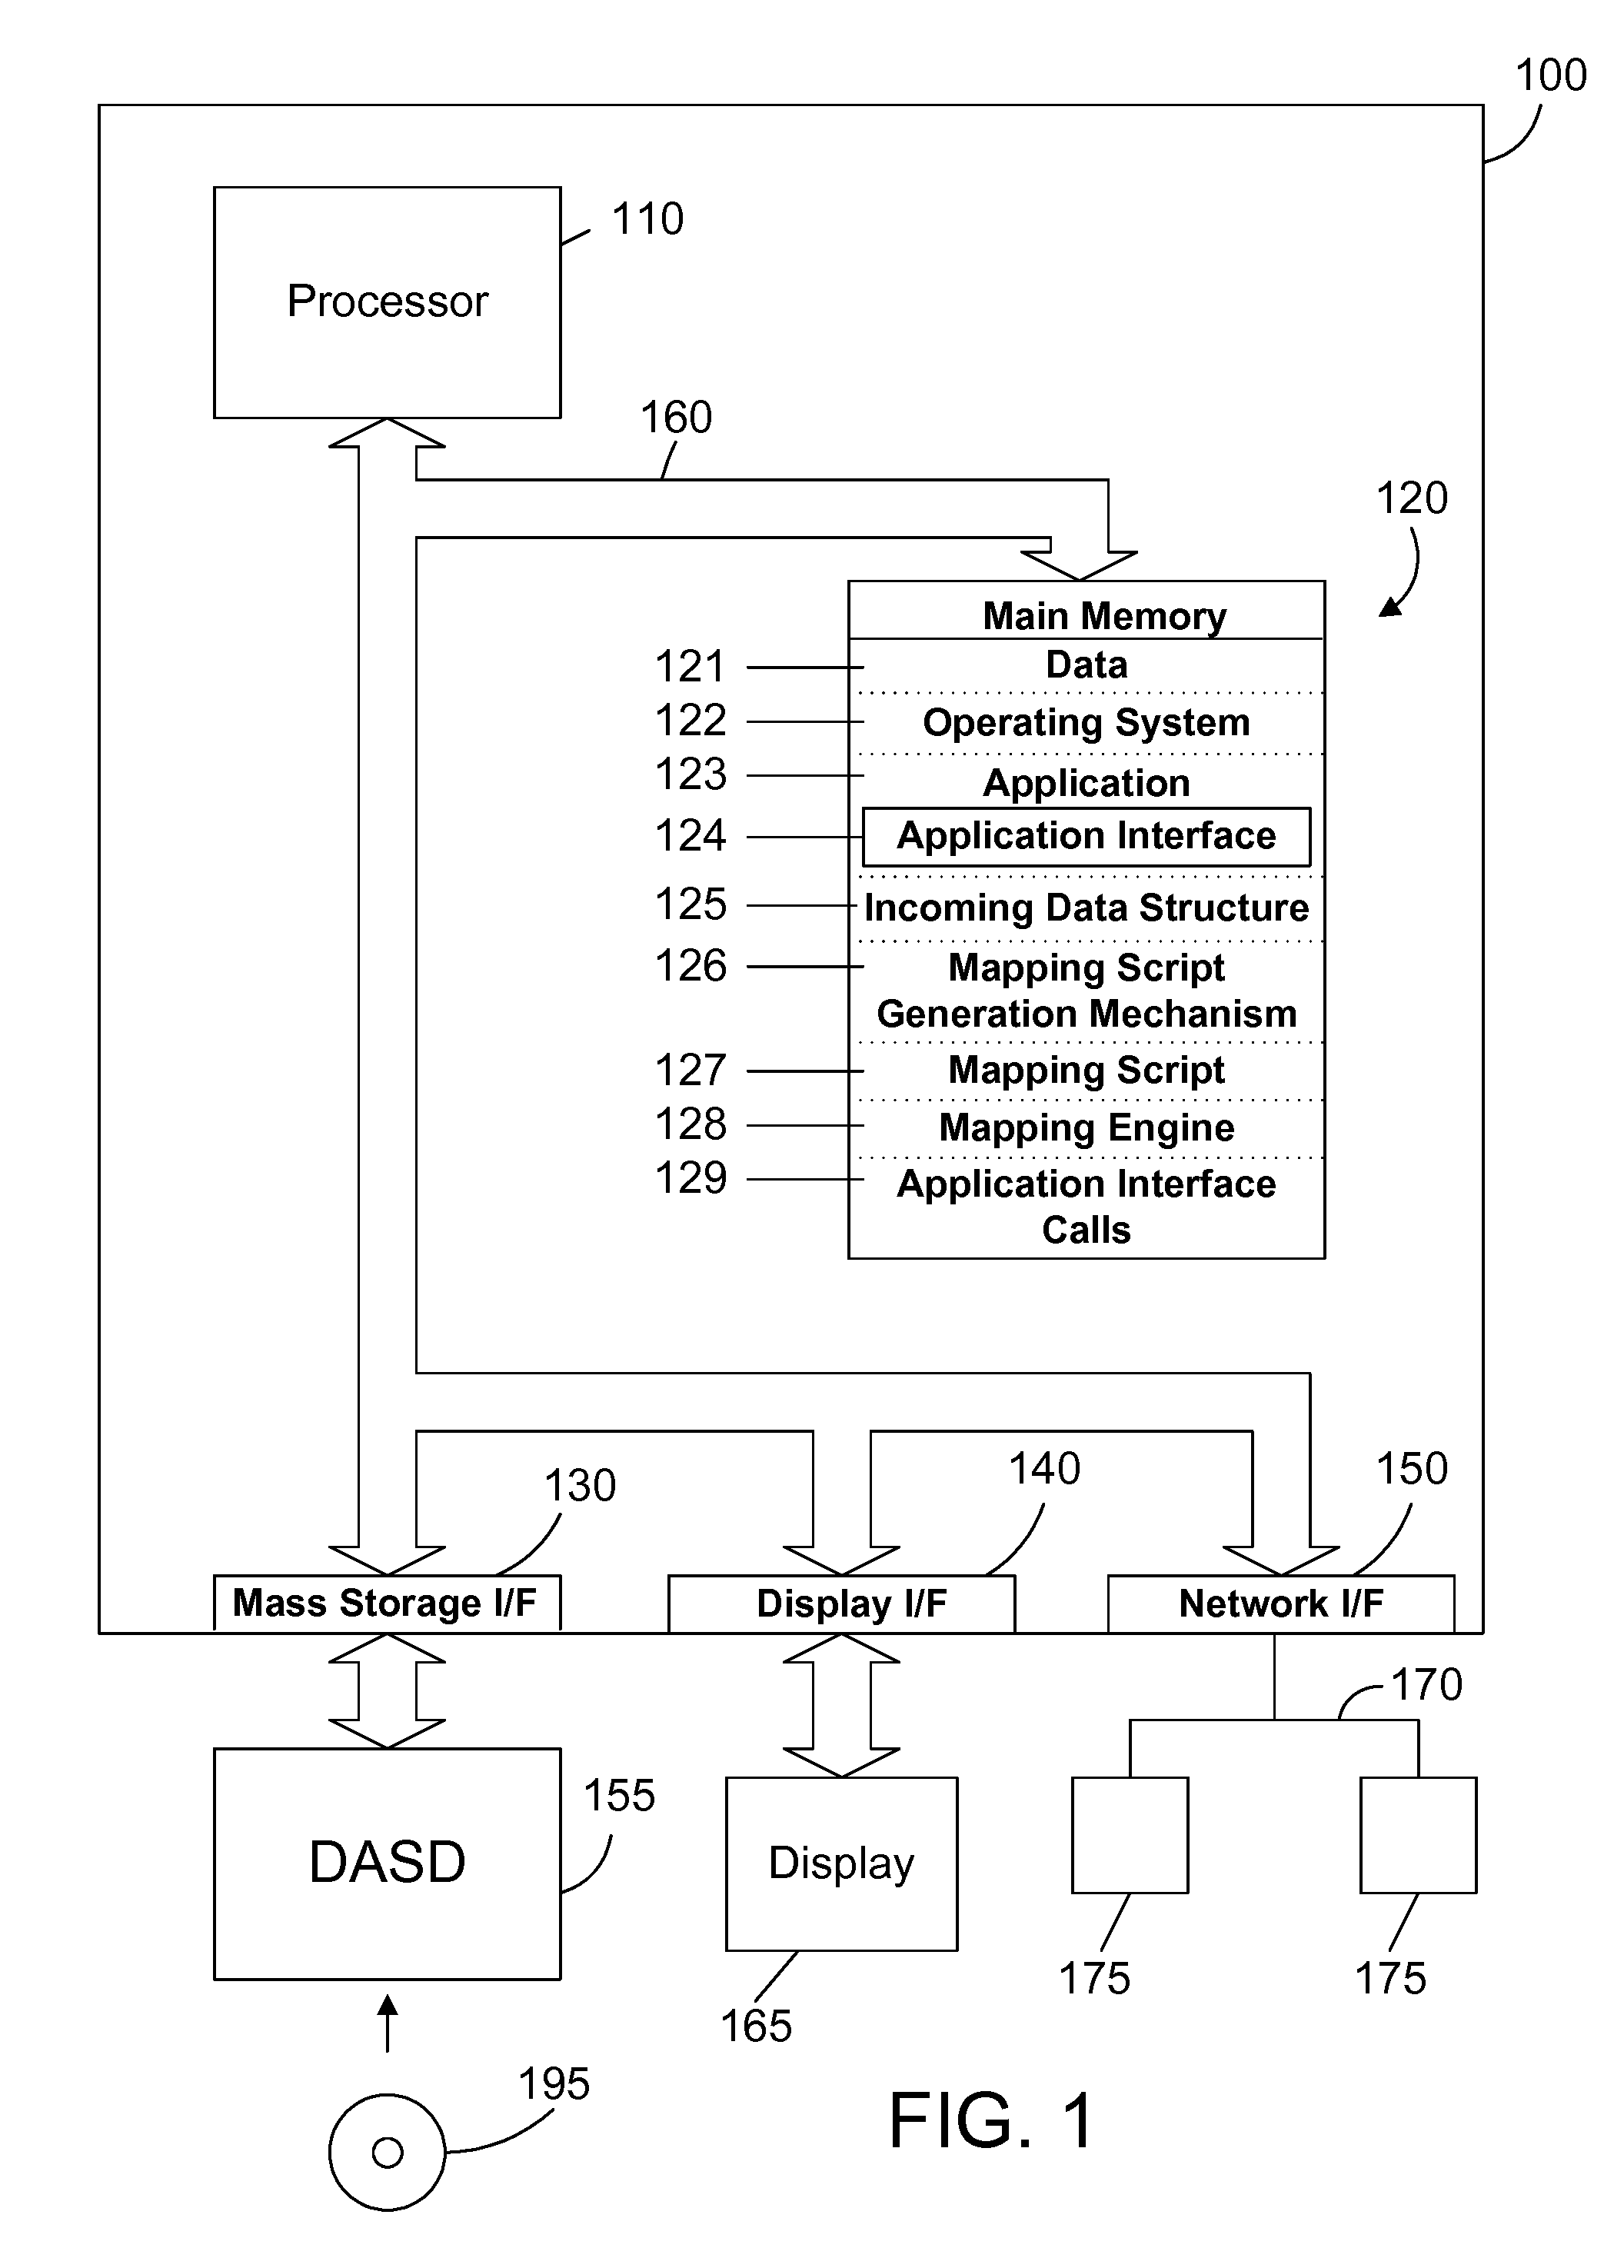 Apparatus and Method for Generating Programming Interactions for a Computer Program from an Incoming Data Structure